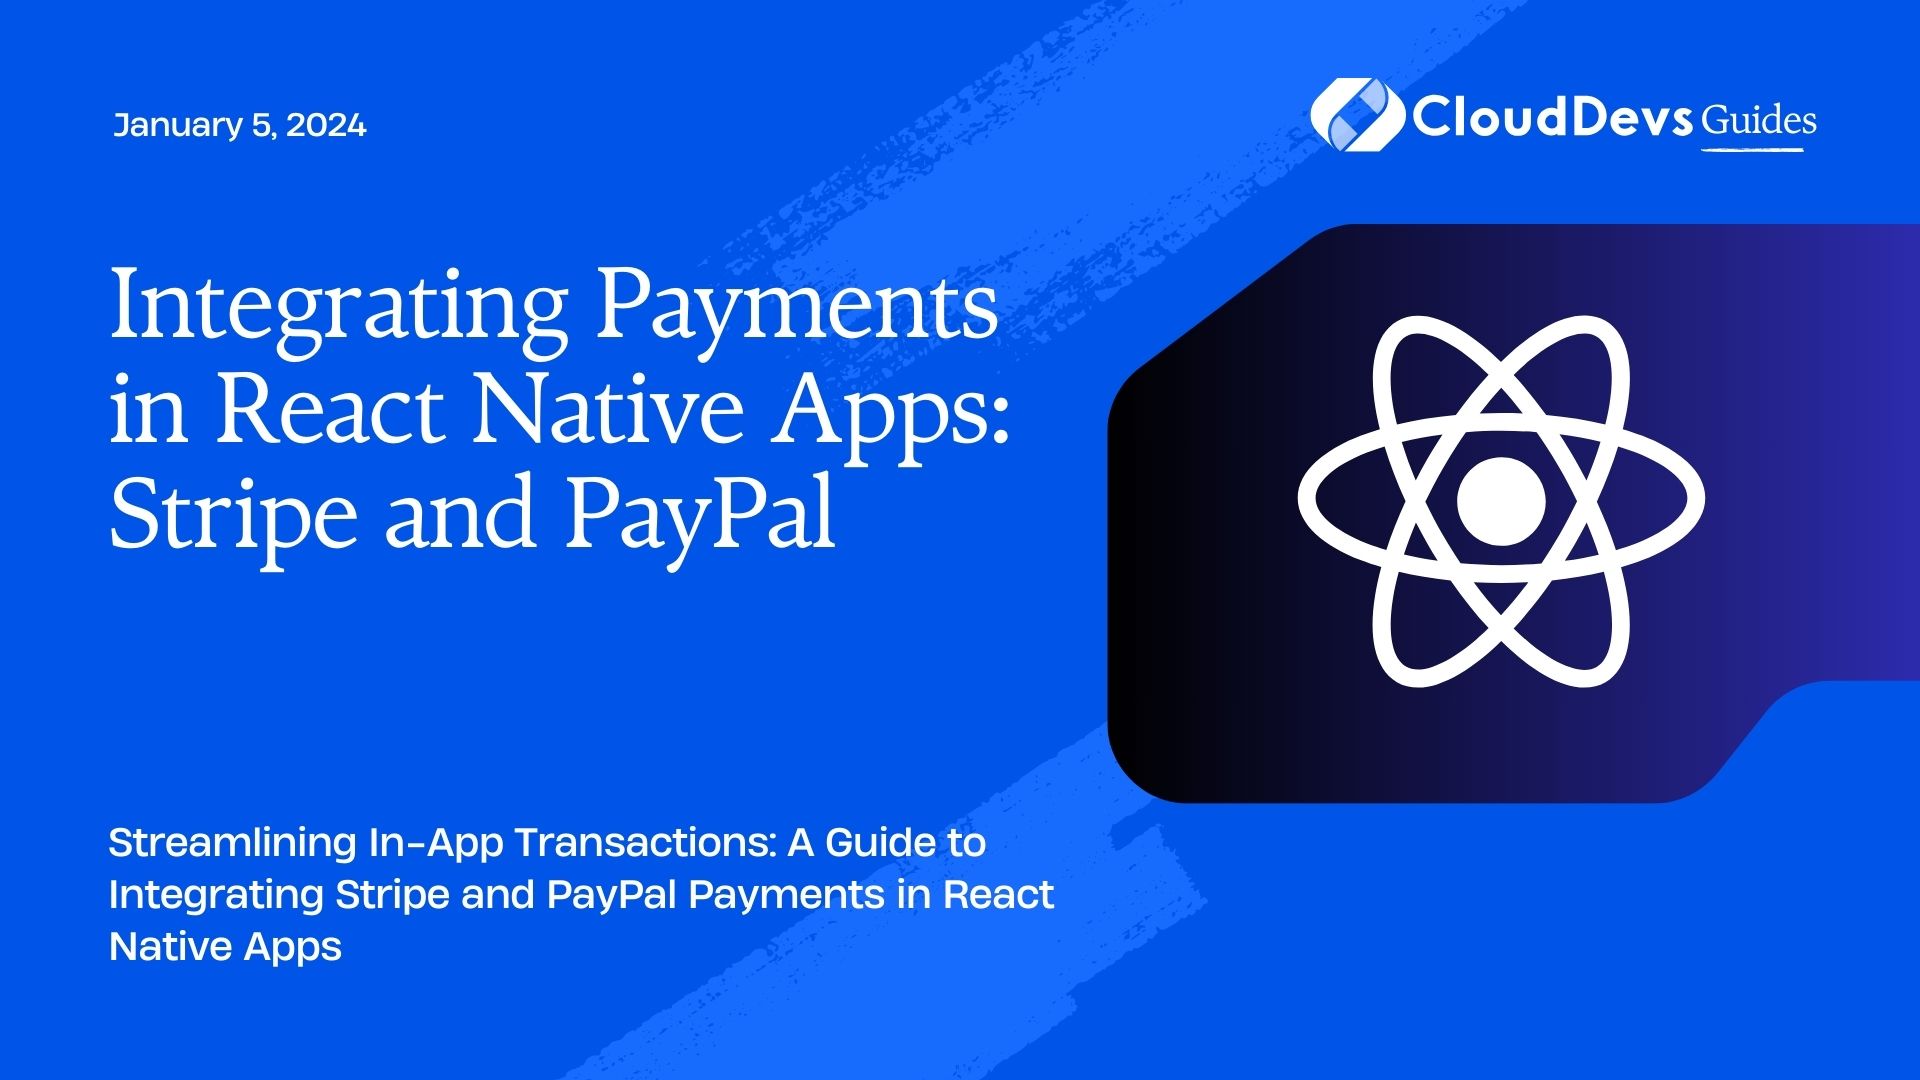 Integrating Payments in React Native Apps: Stripe and PayPal